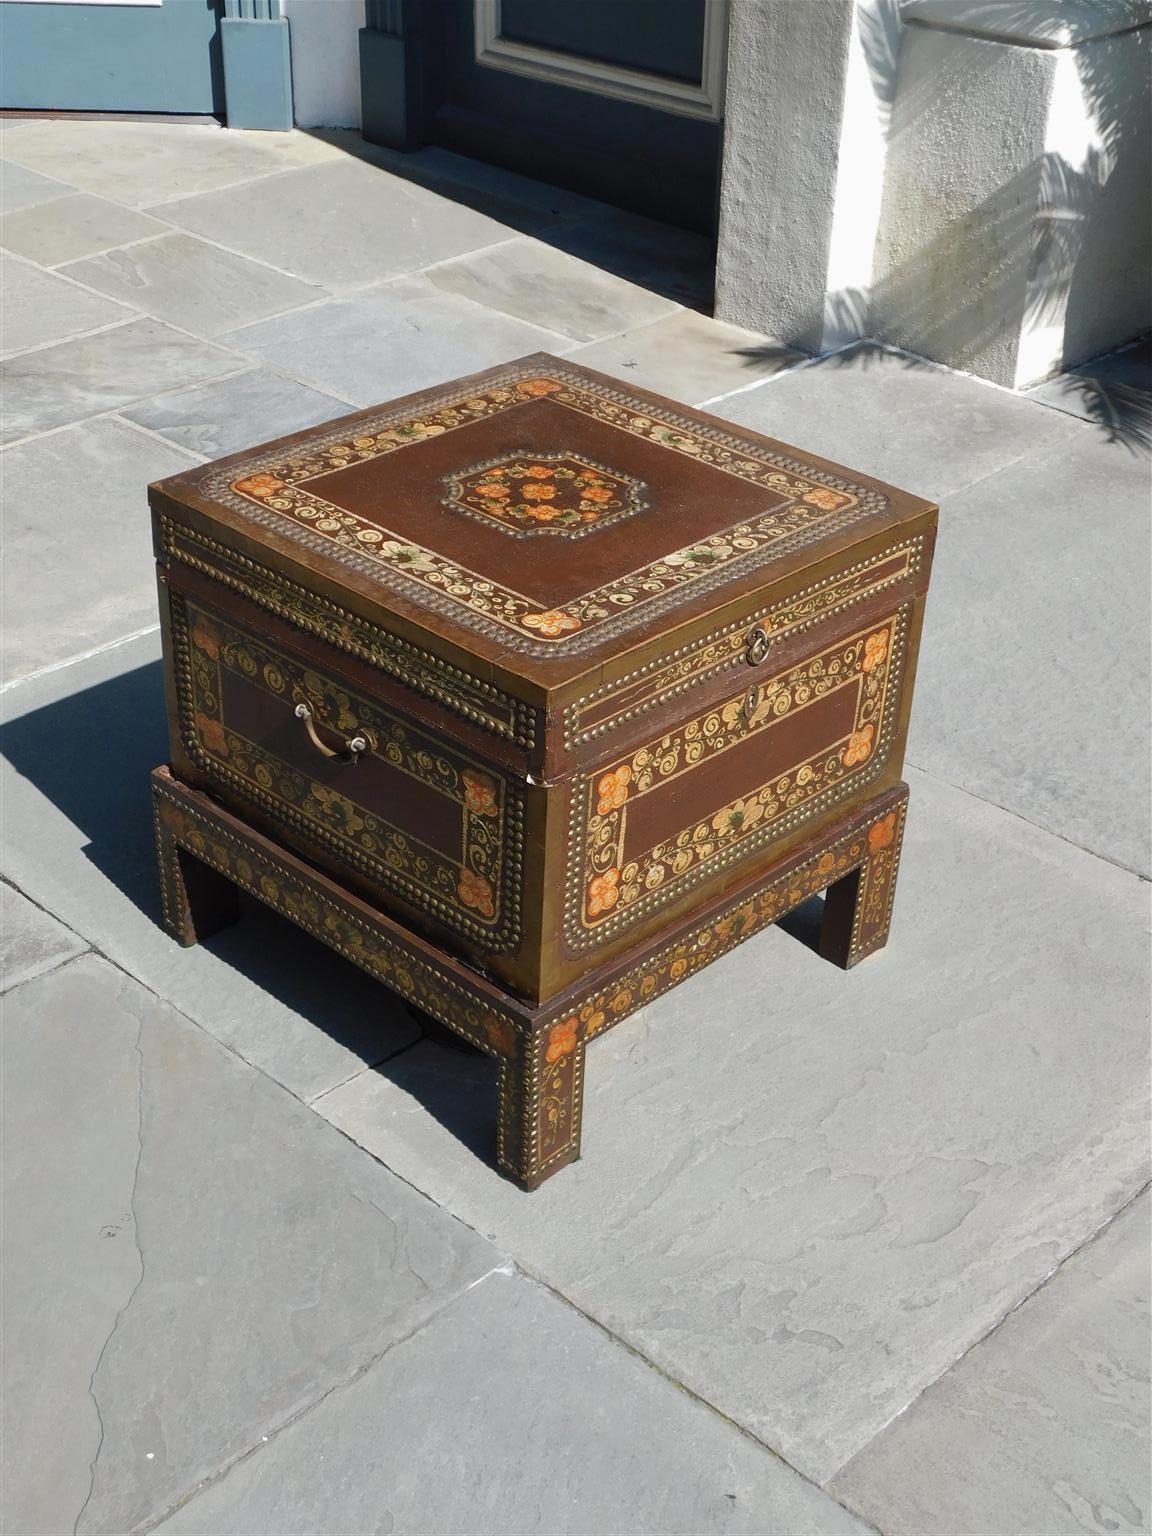 Chinese Export Chinese Foliage Painted & Brass Mounted Tacked Chest on Stand with Key, C. 1880 For Sale